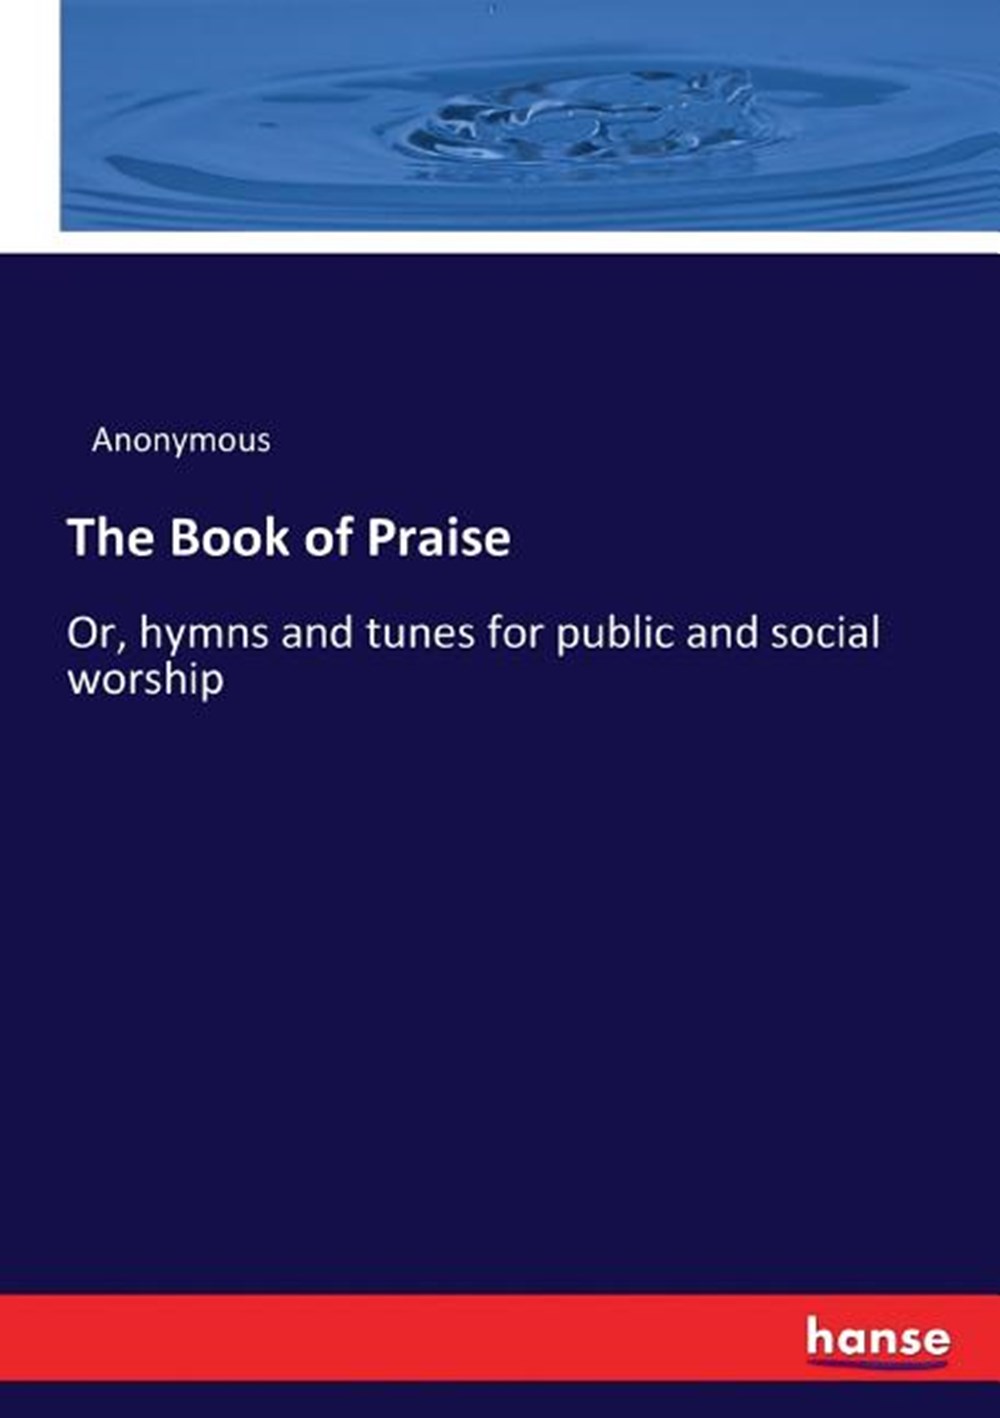 Book of Praise: Or, hymns and tunes for public and social worship